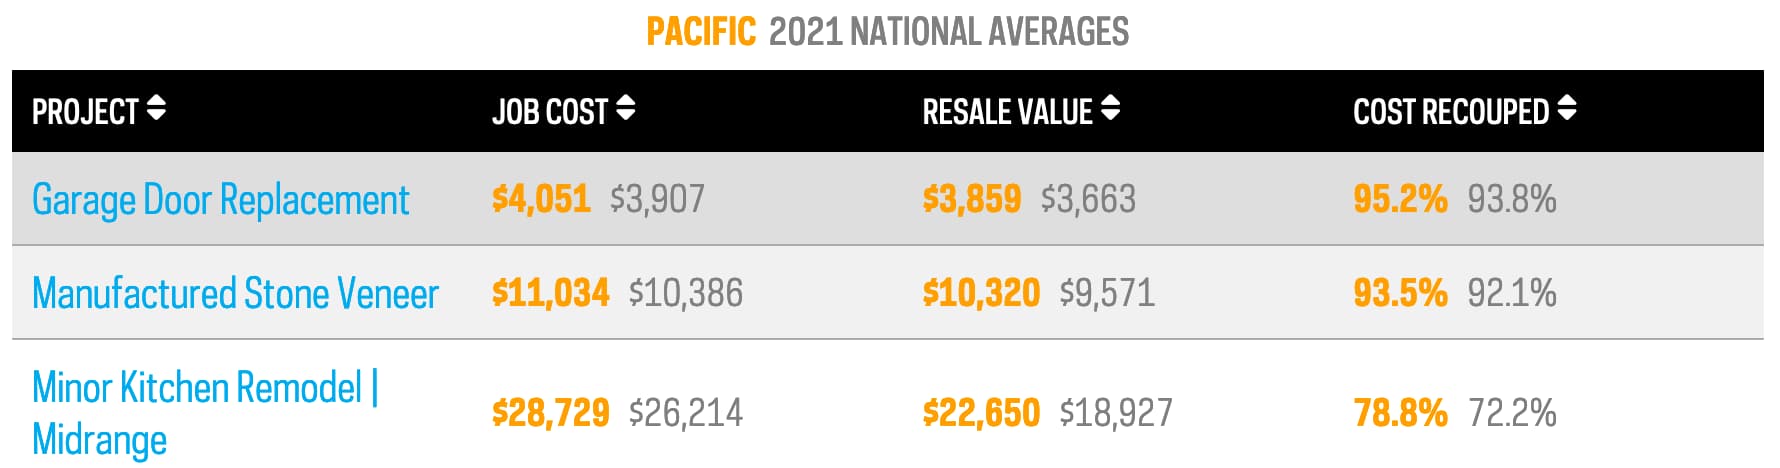 Remodeling ROI Pacific Natinal Averages